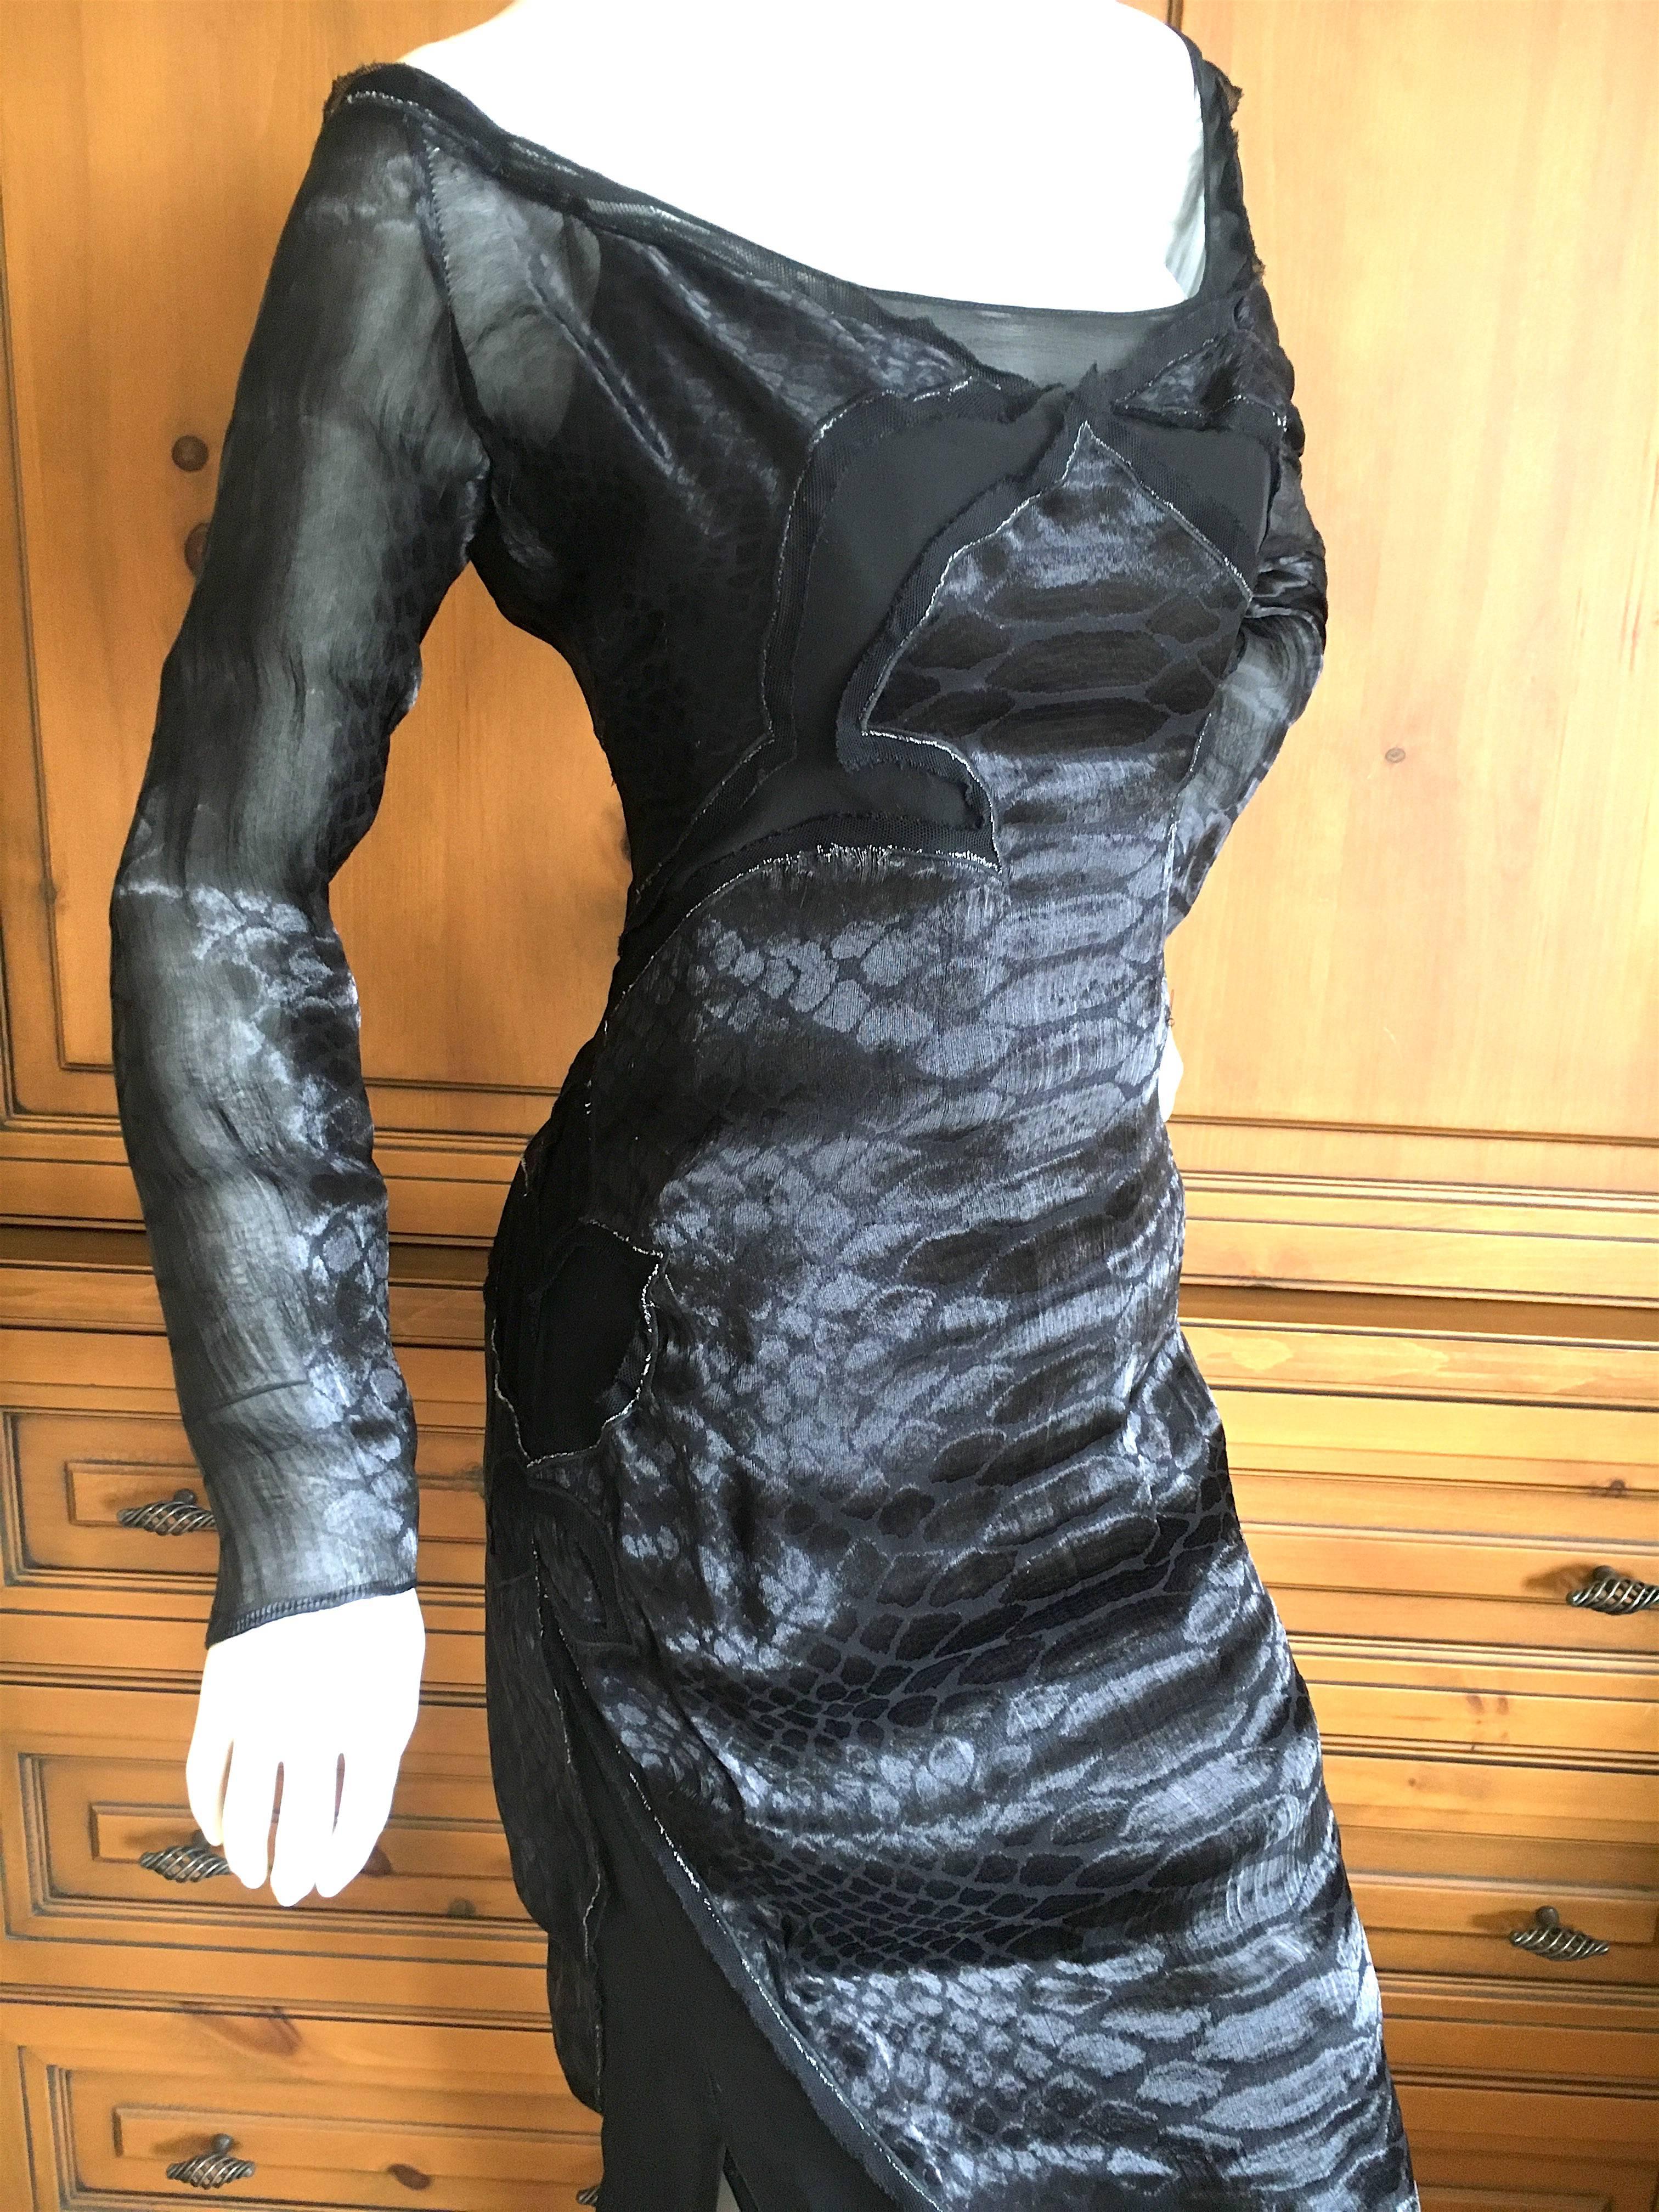 Yves Saint Laurent by Tom Ford Reptile Print Black Dress Fall 2004 For Sale 1